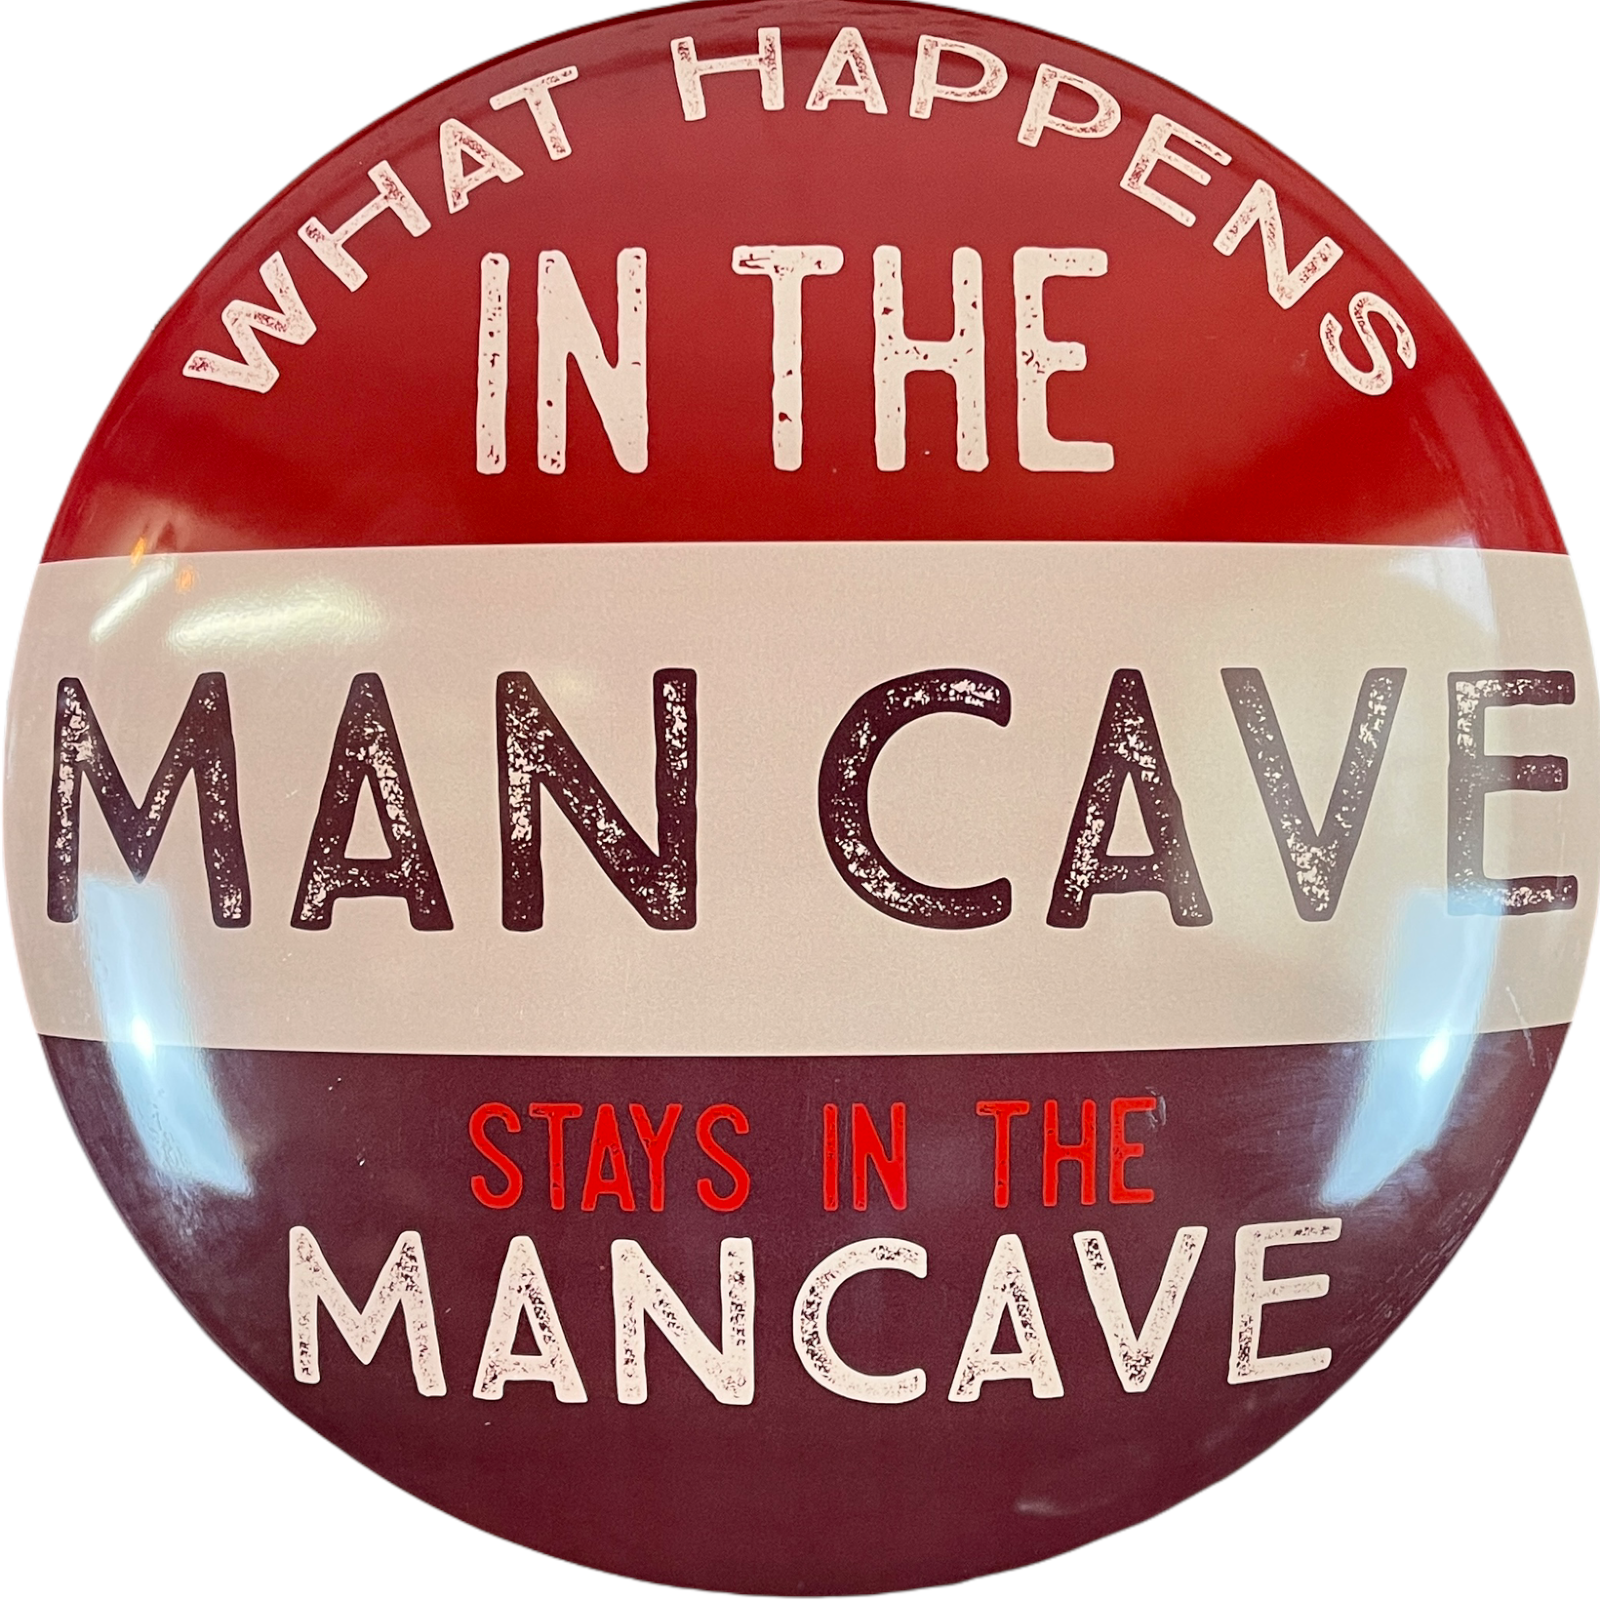 What Happens In The Man Cave Stays In The Man Cave Dome Shaped Metal Sign